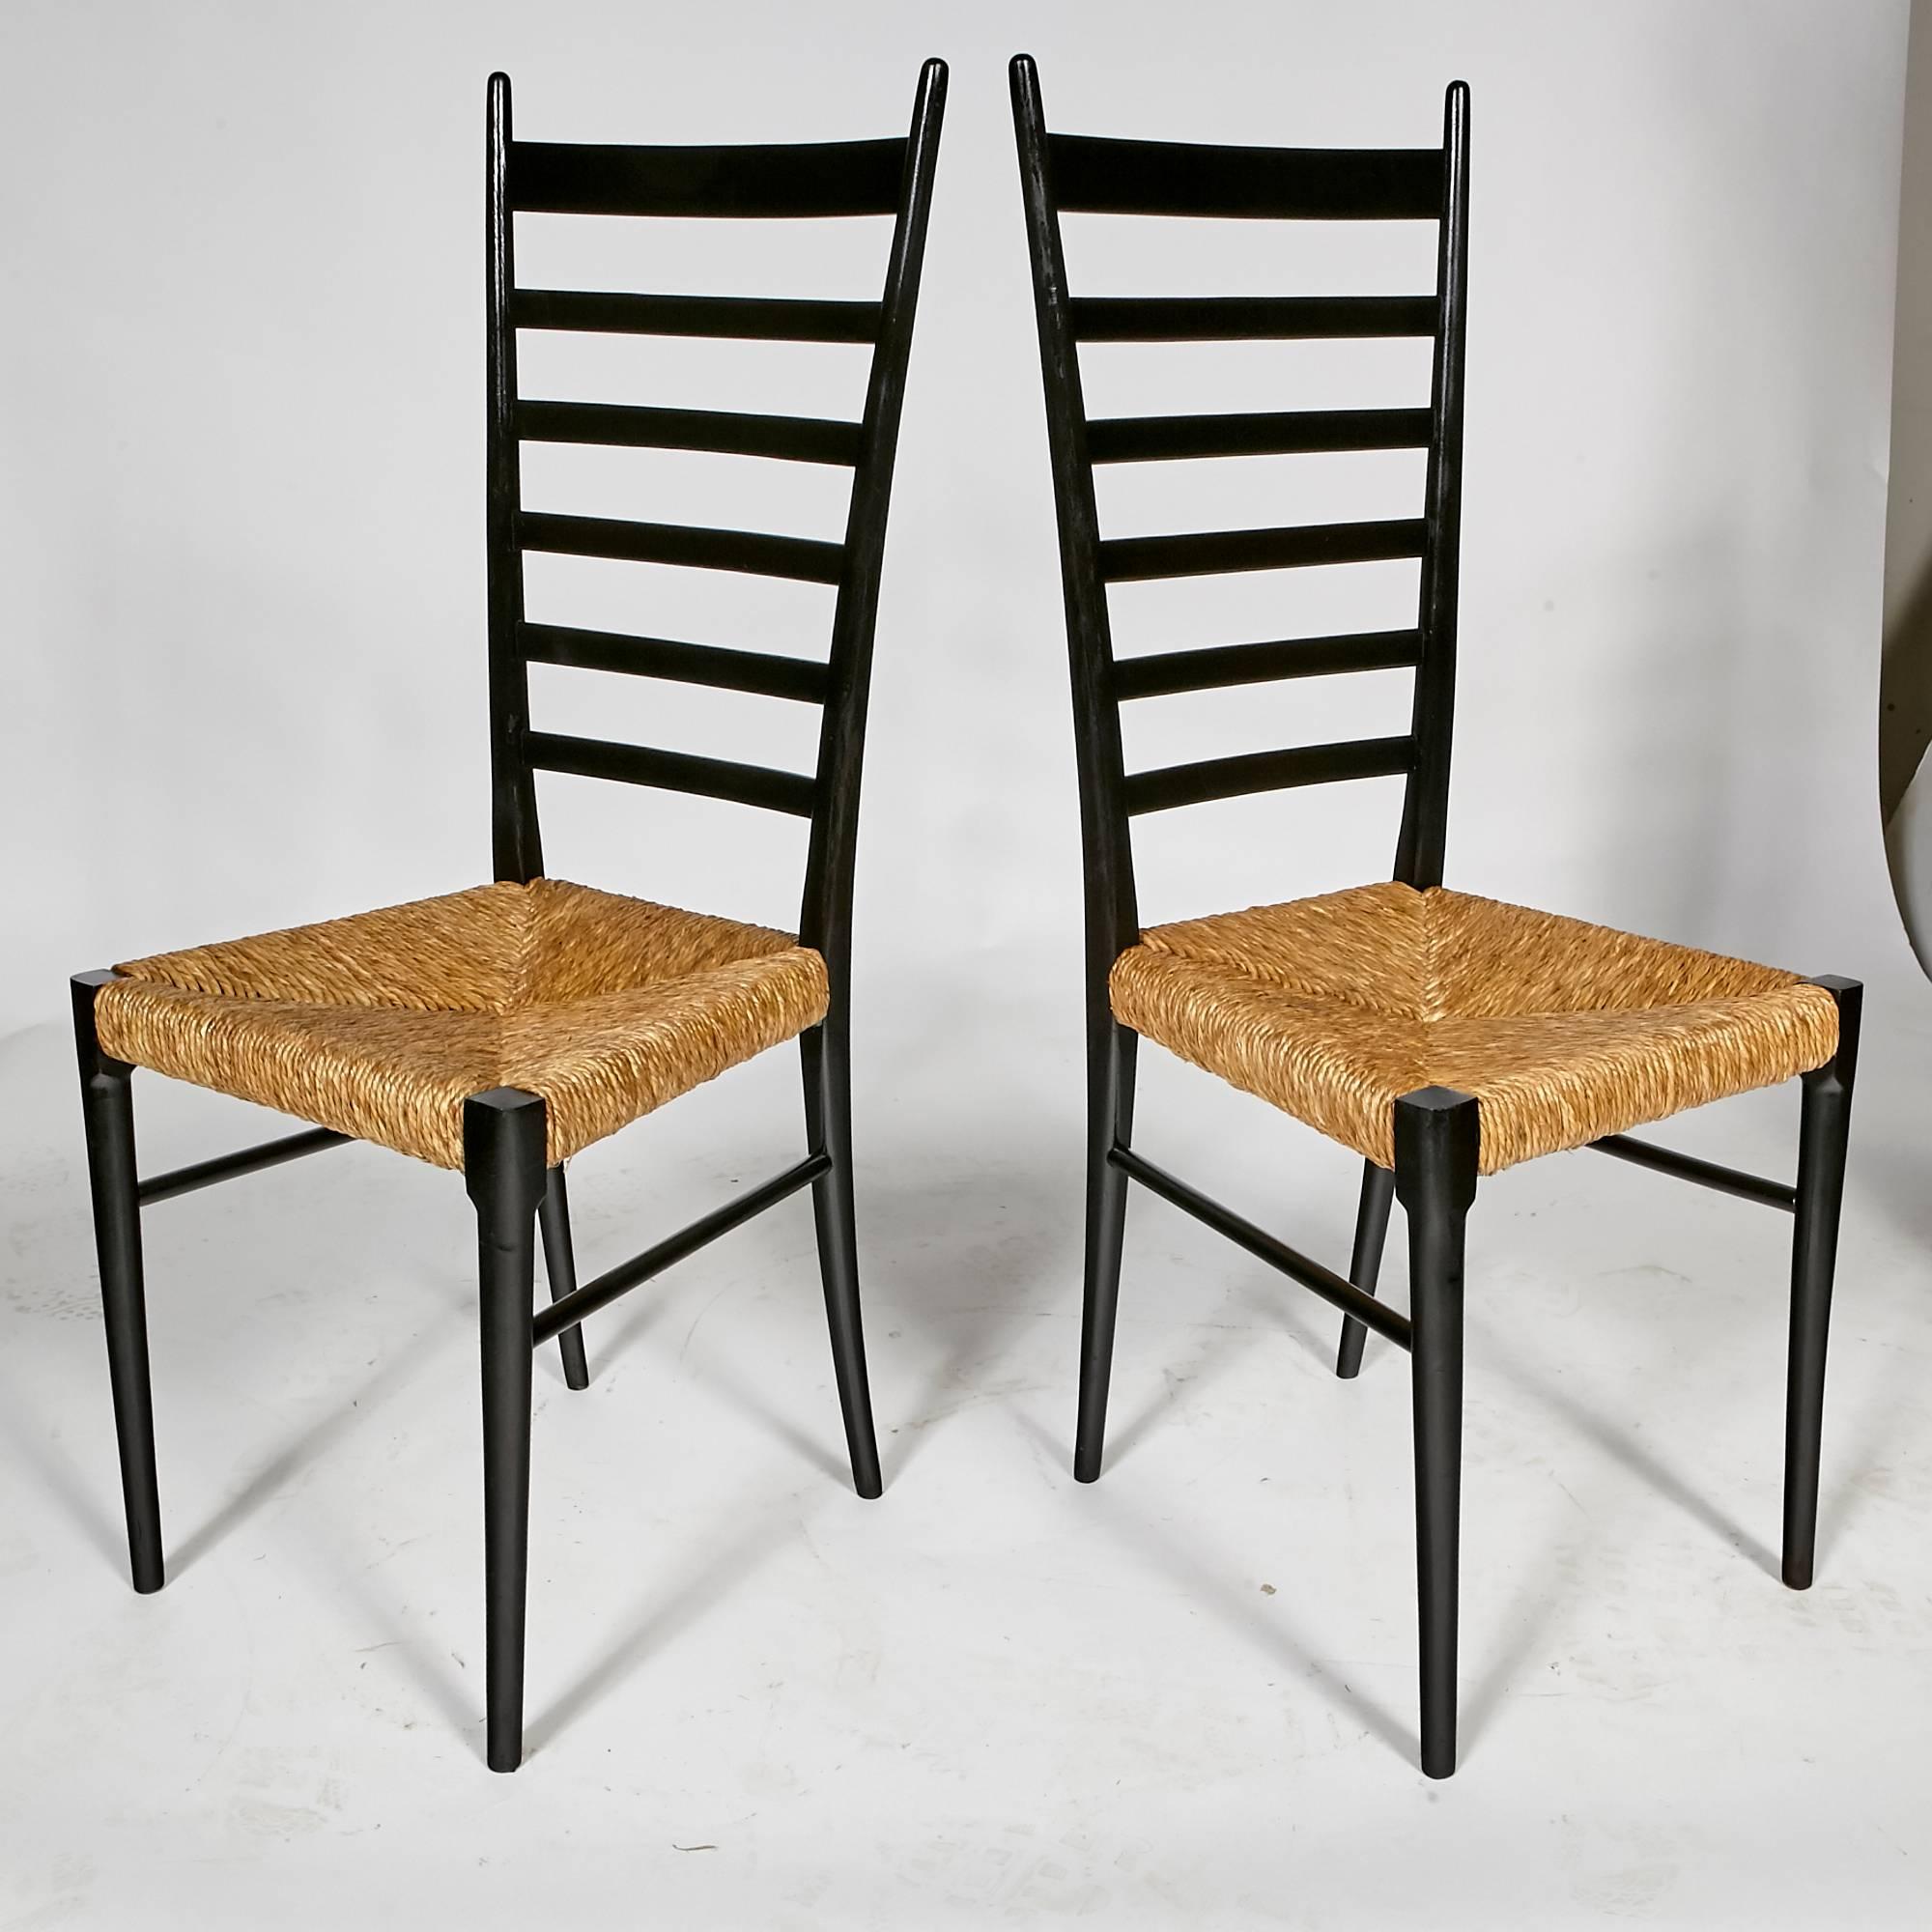 Gio Ponti Ladder Back Chairs, 1950s In Excellent Condition For Sale In Amherst, NH